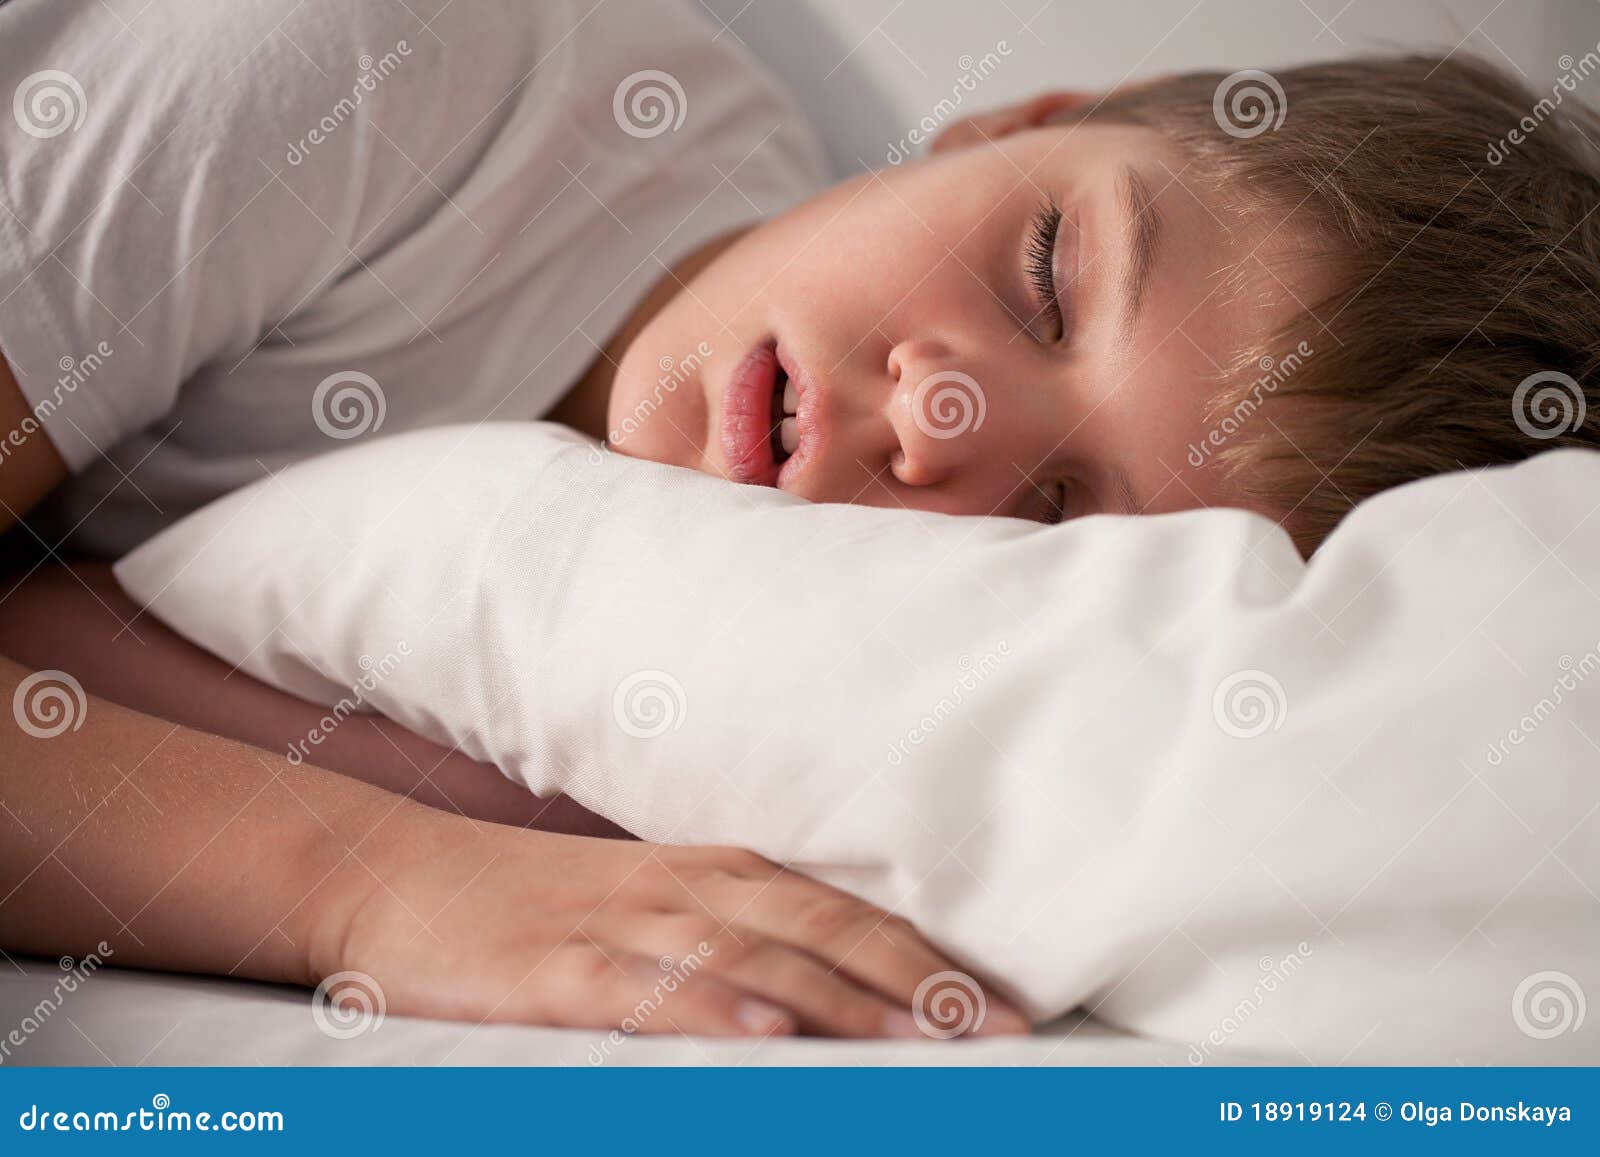 little boy sleeping with open mouth